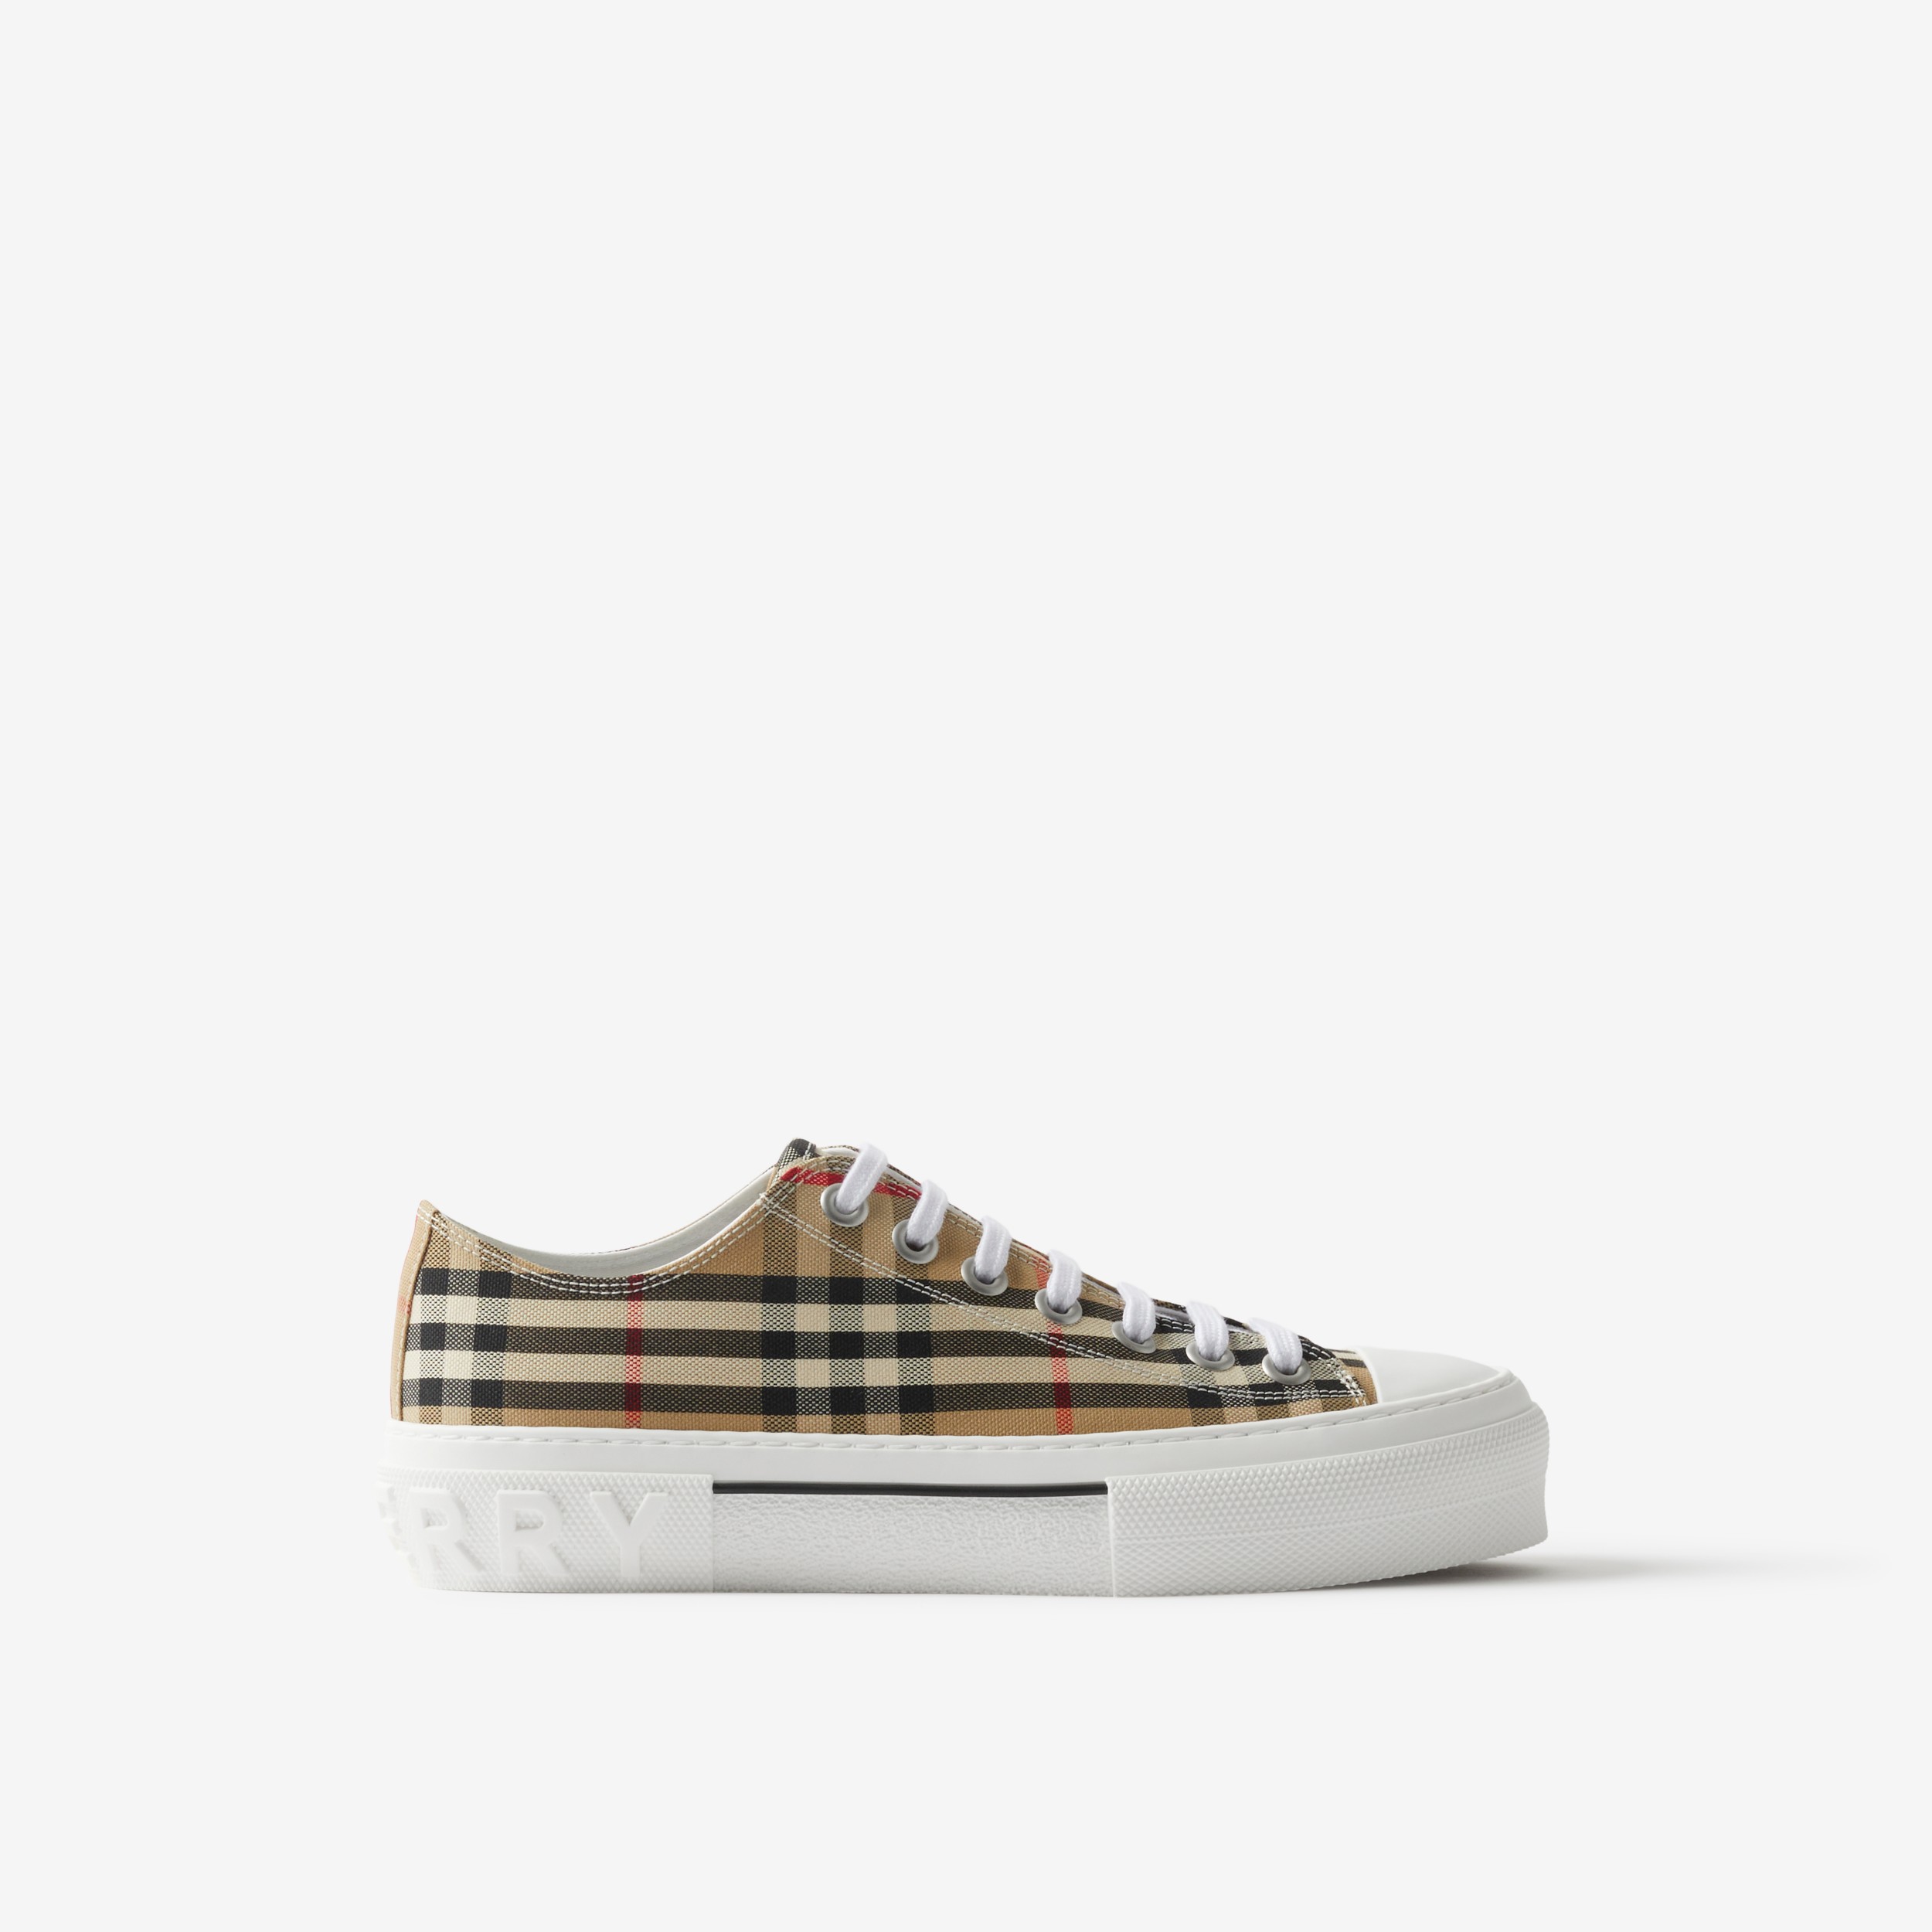 Ophef beschaving samenzwering Vintage Check Cotton Sneakers in Archive Beige | Burberry® Official